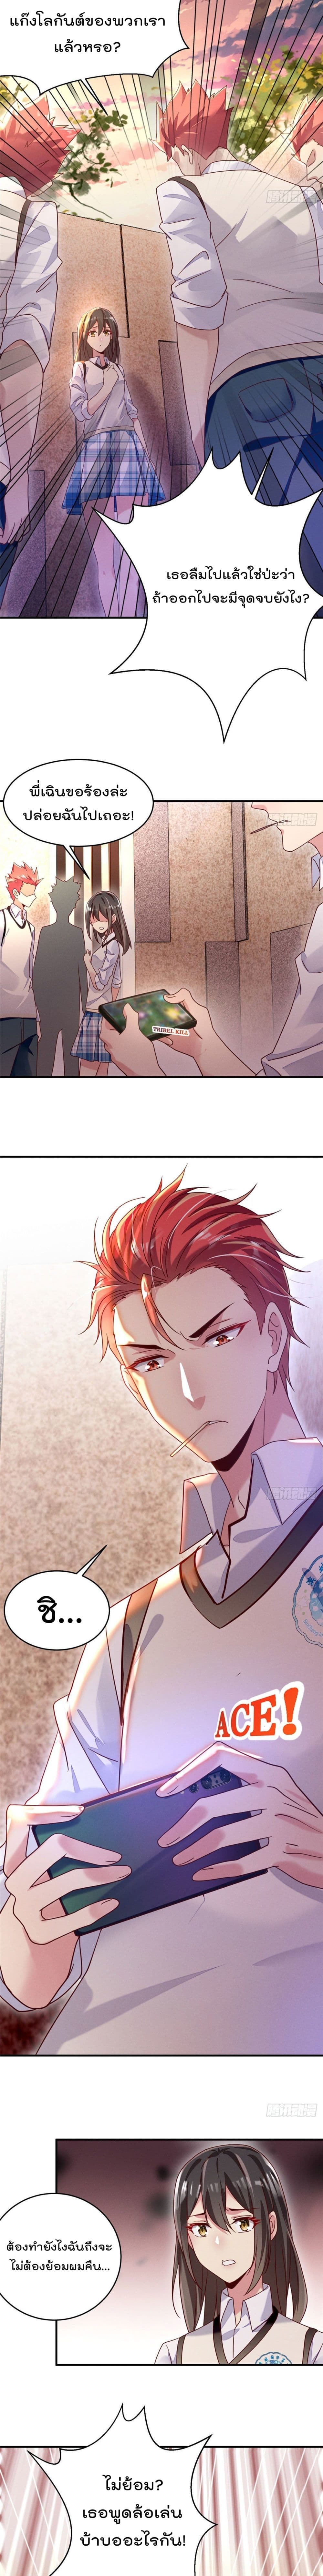 Forced to Fall in Love With the Boss Every Day 7 07